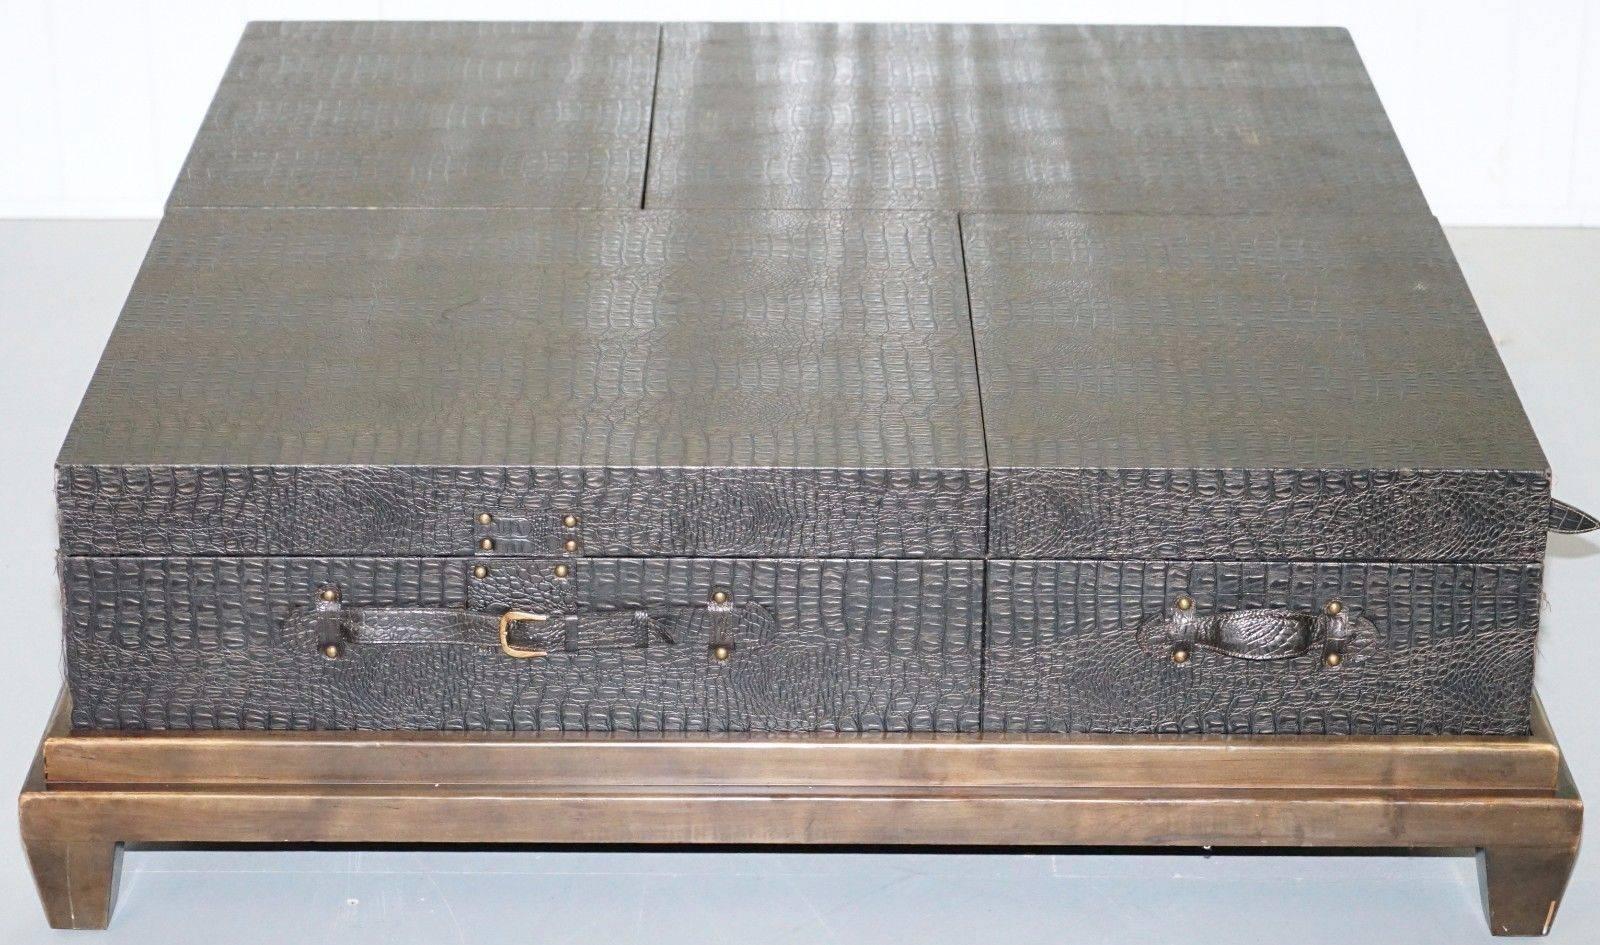 We are delighted to offer for sale this lovely huge 130cm square metamorphic coffee table with hidden drawers upholstered with faux alligator skin and styled around luggage

Please note the delivery fee listed is just a guide, for an accurate quote